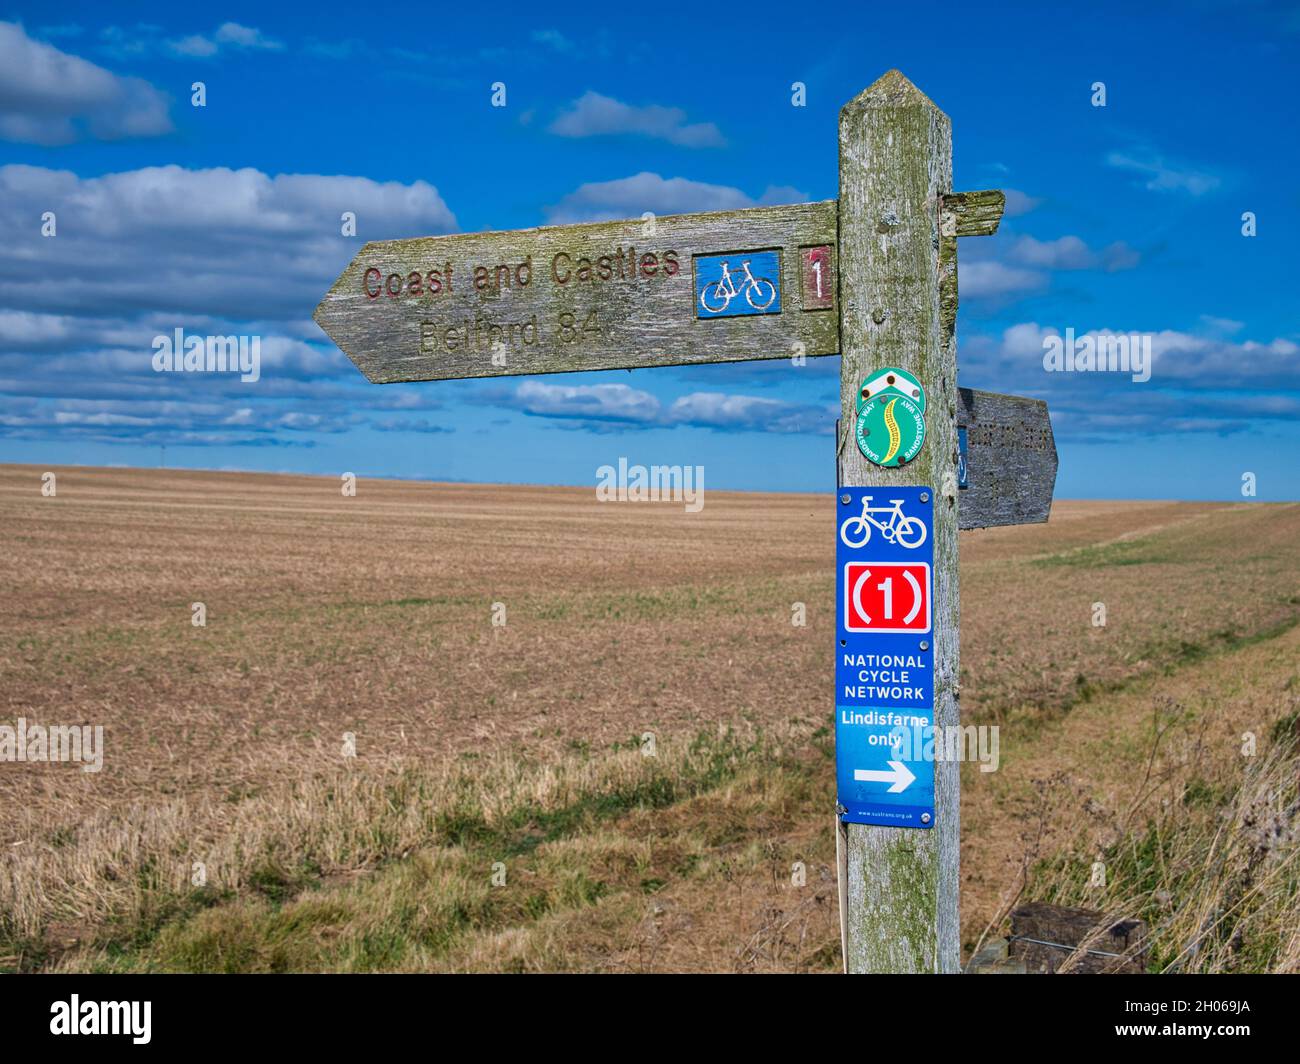 A wooden sign post points the way of UK National Cycle Route 1 and the Coast and Castles route in Northumberland, UK. Behind the sign is a field of cr Stock Photo